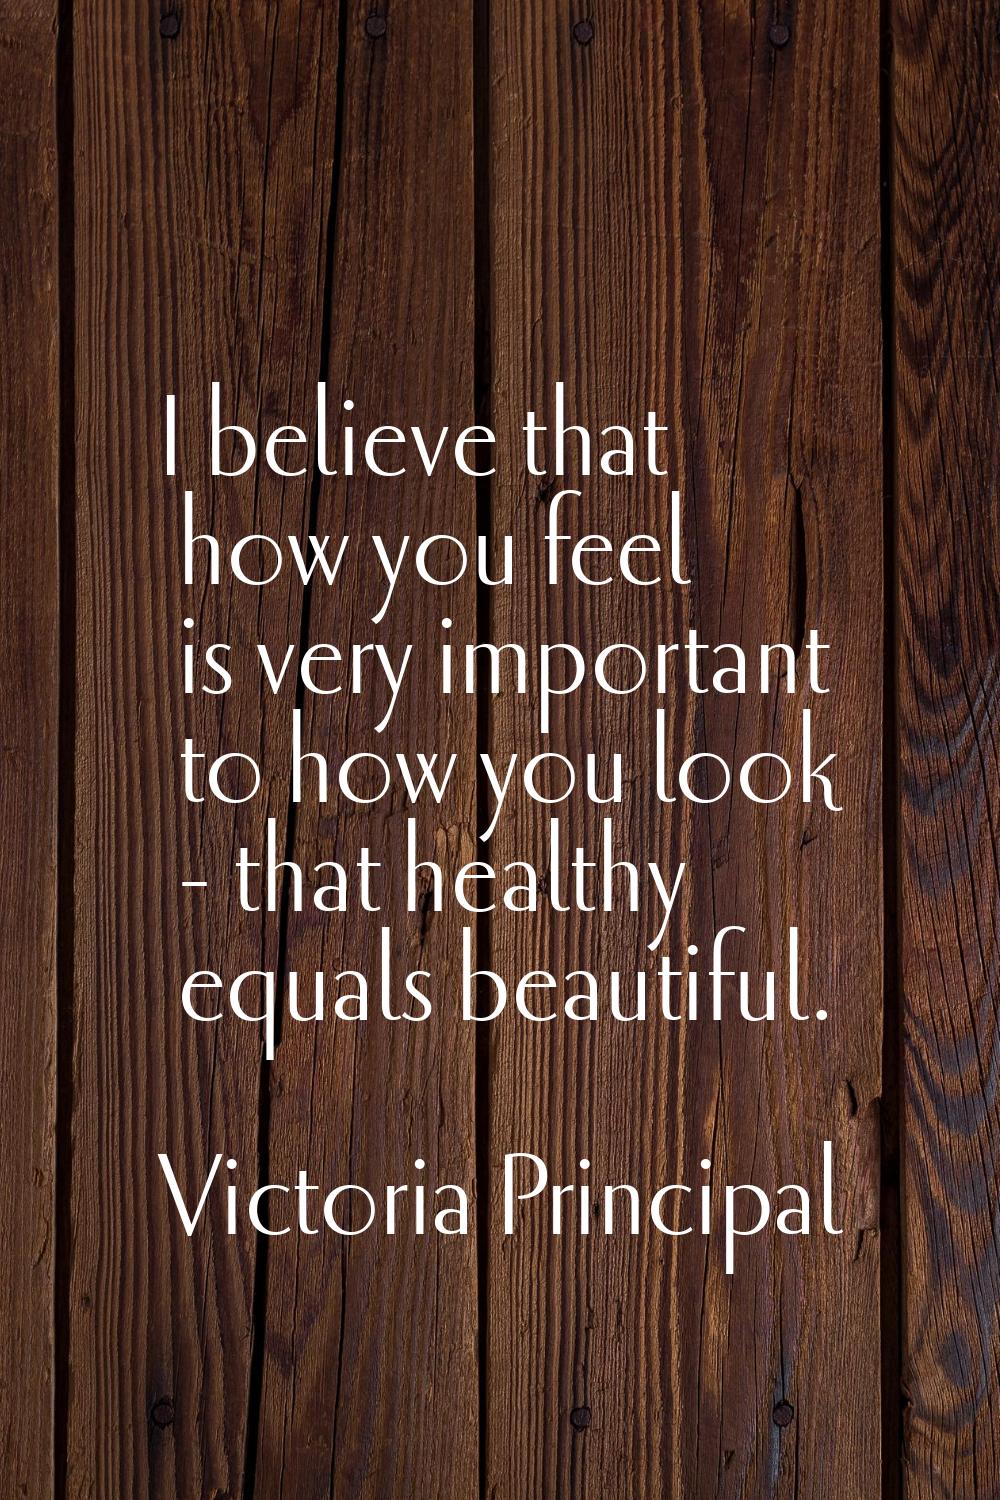 I believe that how you feel is very important to how you look - that healthy equals beautiful.